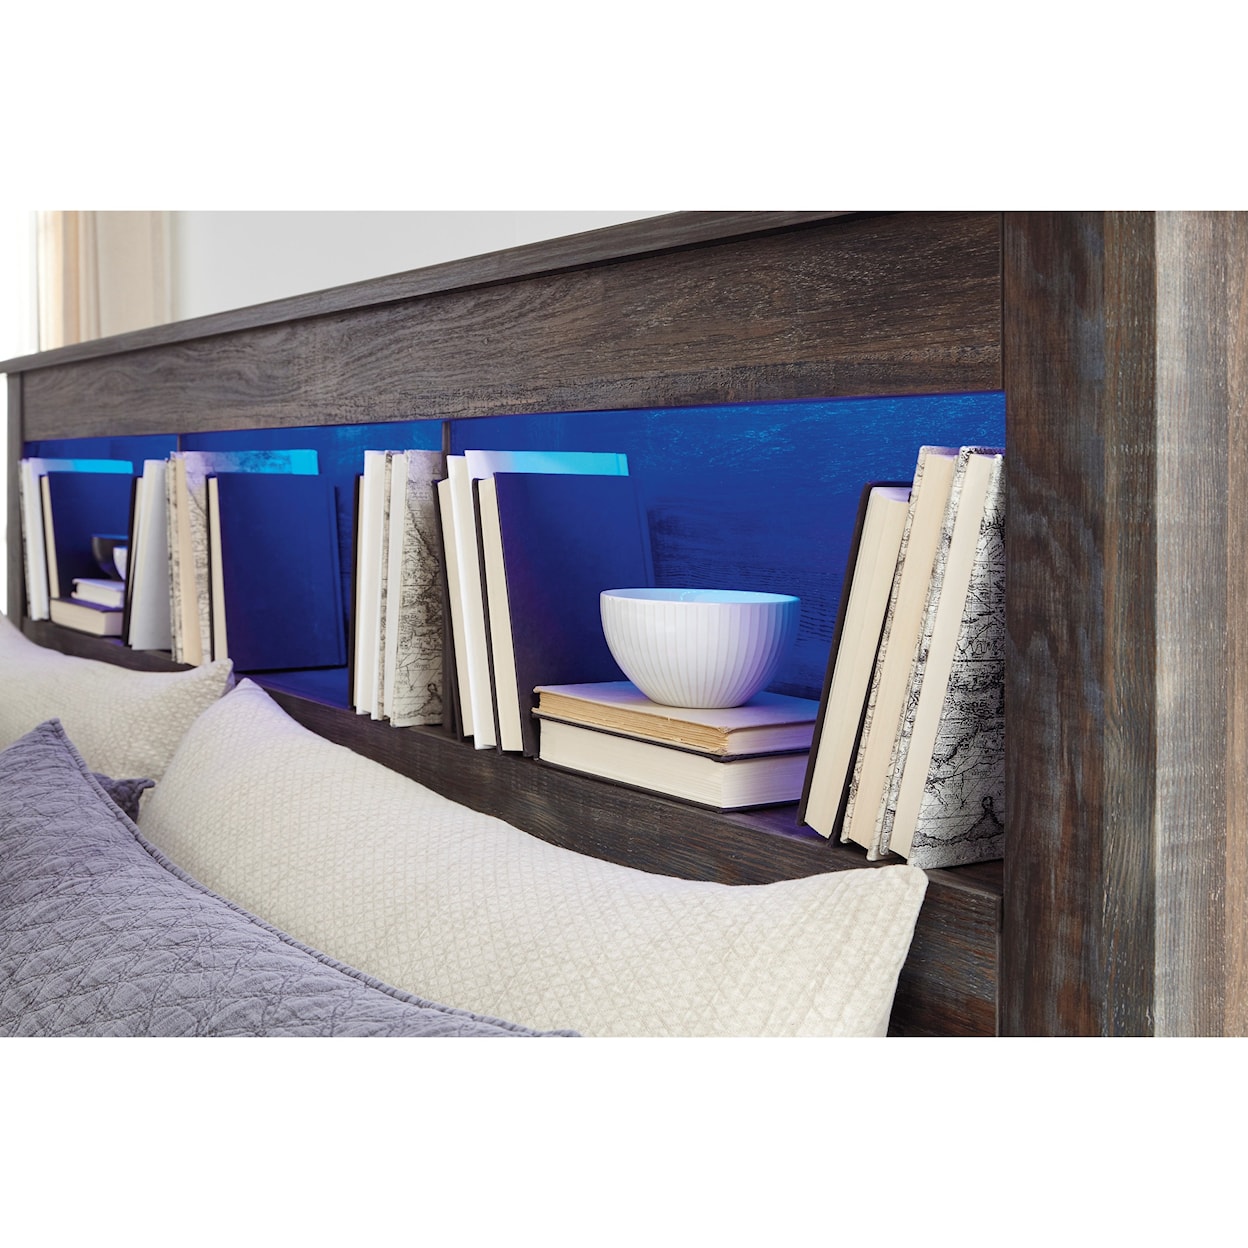 Benchcraft Drystan Queen Bookcase Bed with Footboard Drawers